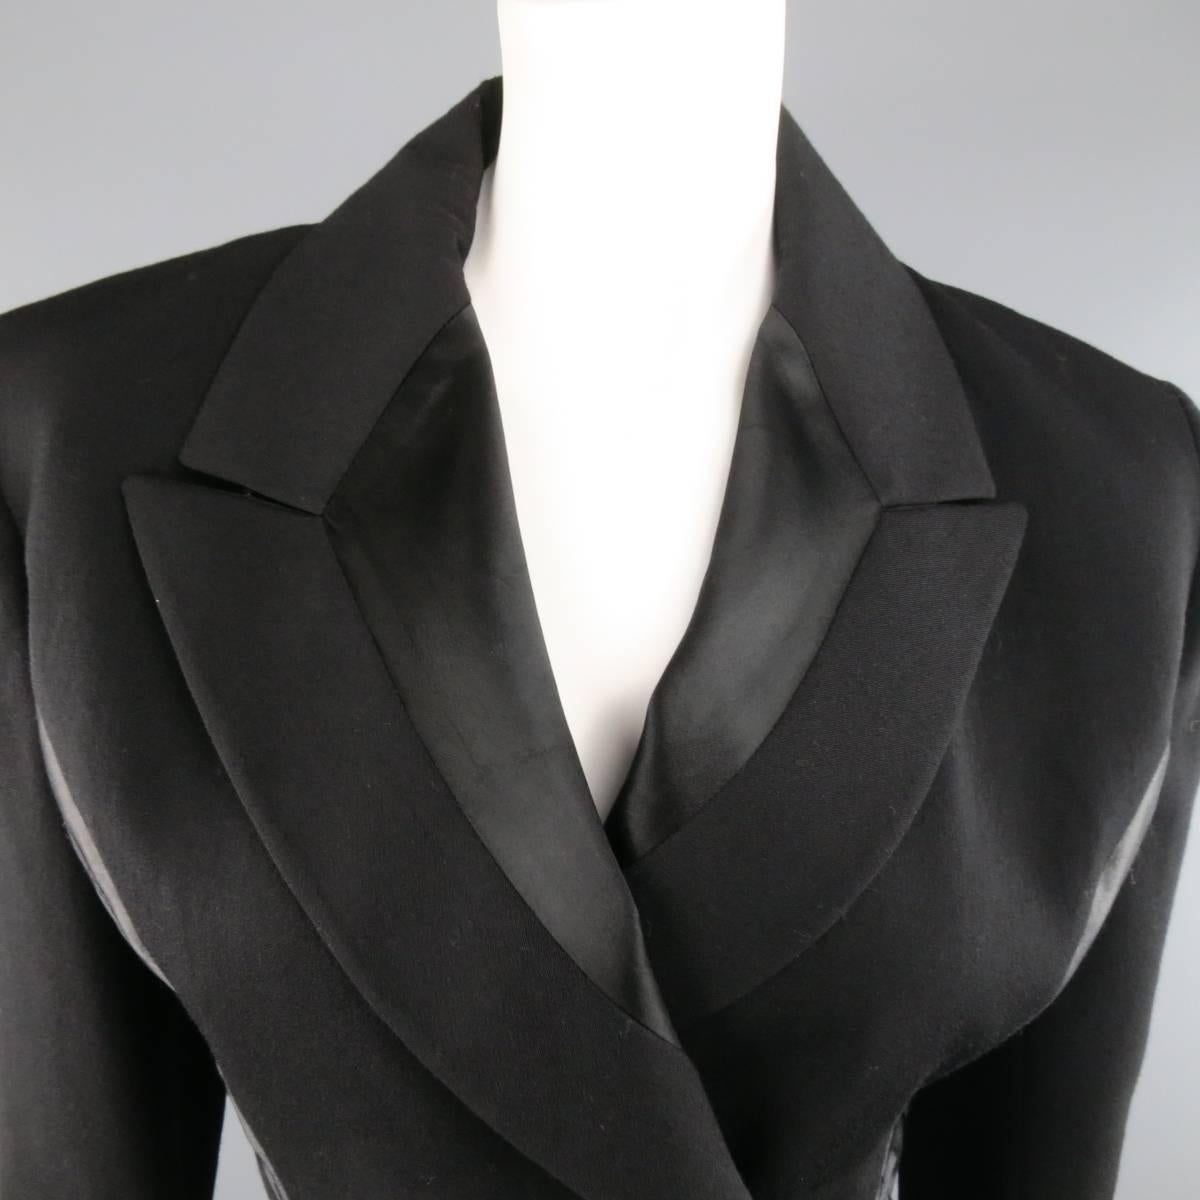 JOHN GALLIANO black wool jacket features a peak lapel with black silk detailing, side quilted silk paneling detailing, single button closure, and cropped hem. Made in the UK.
 
Good Pre-Owned Condition.
Marked: 34
 
Measurements:
 
Shoulders: 17